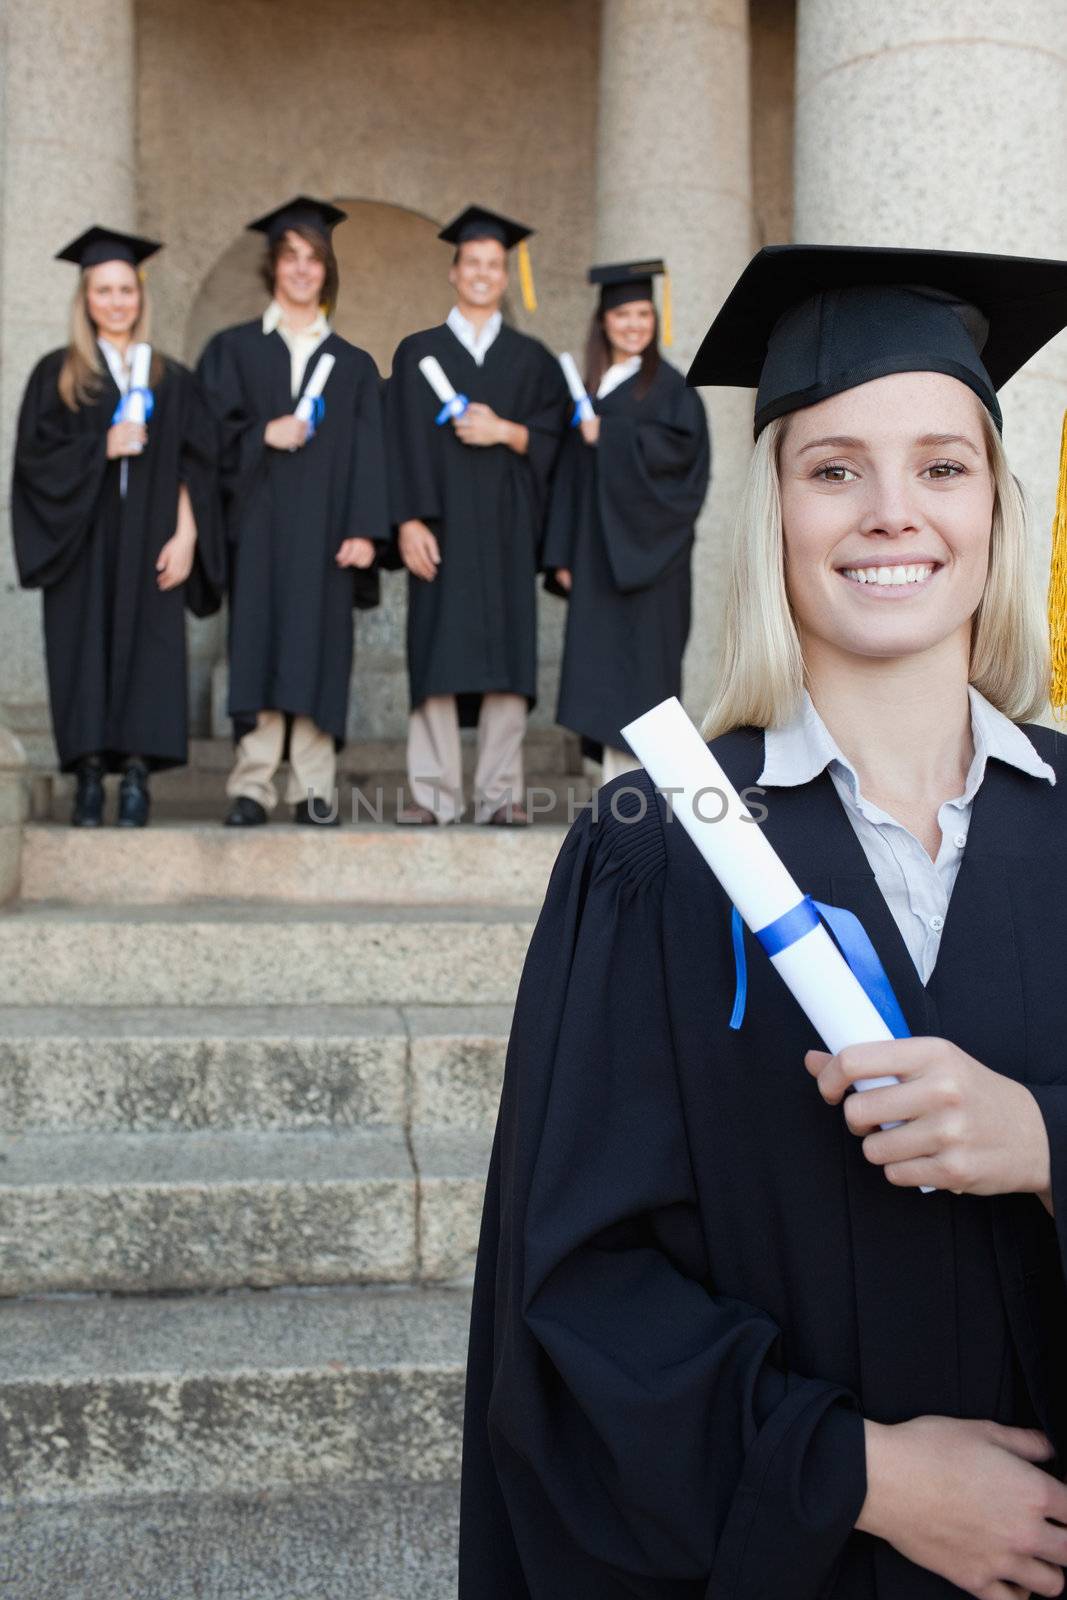 Close-up of a blonde graduate smiling with her friends in background in front of the university